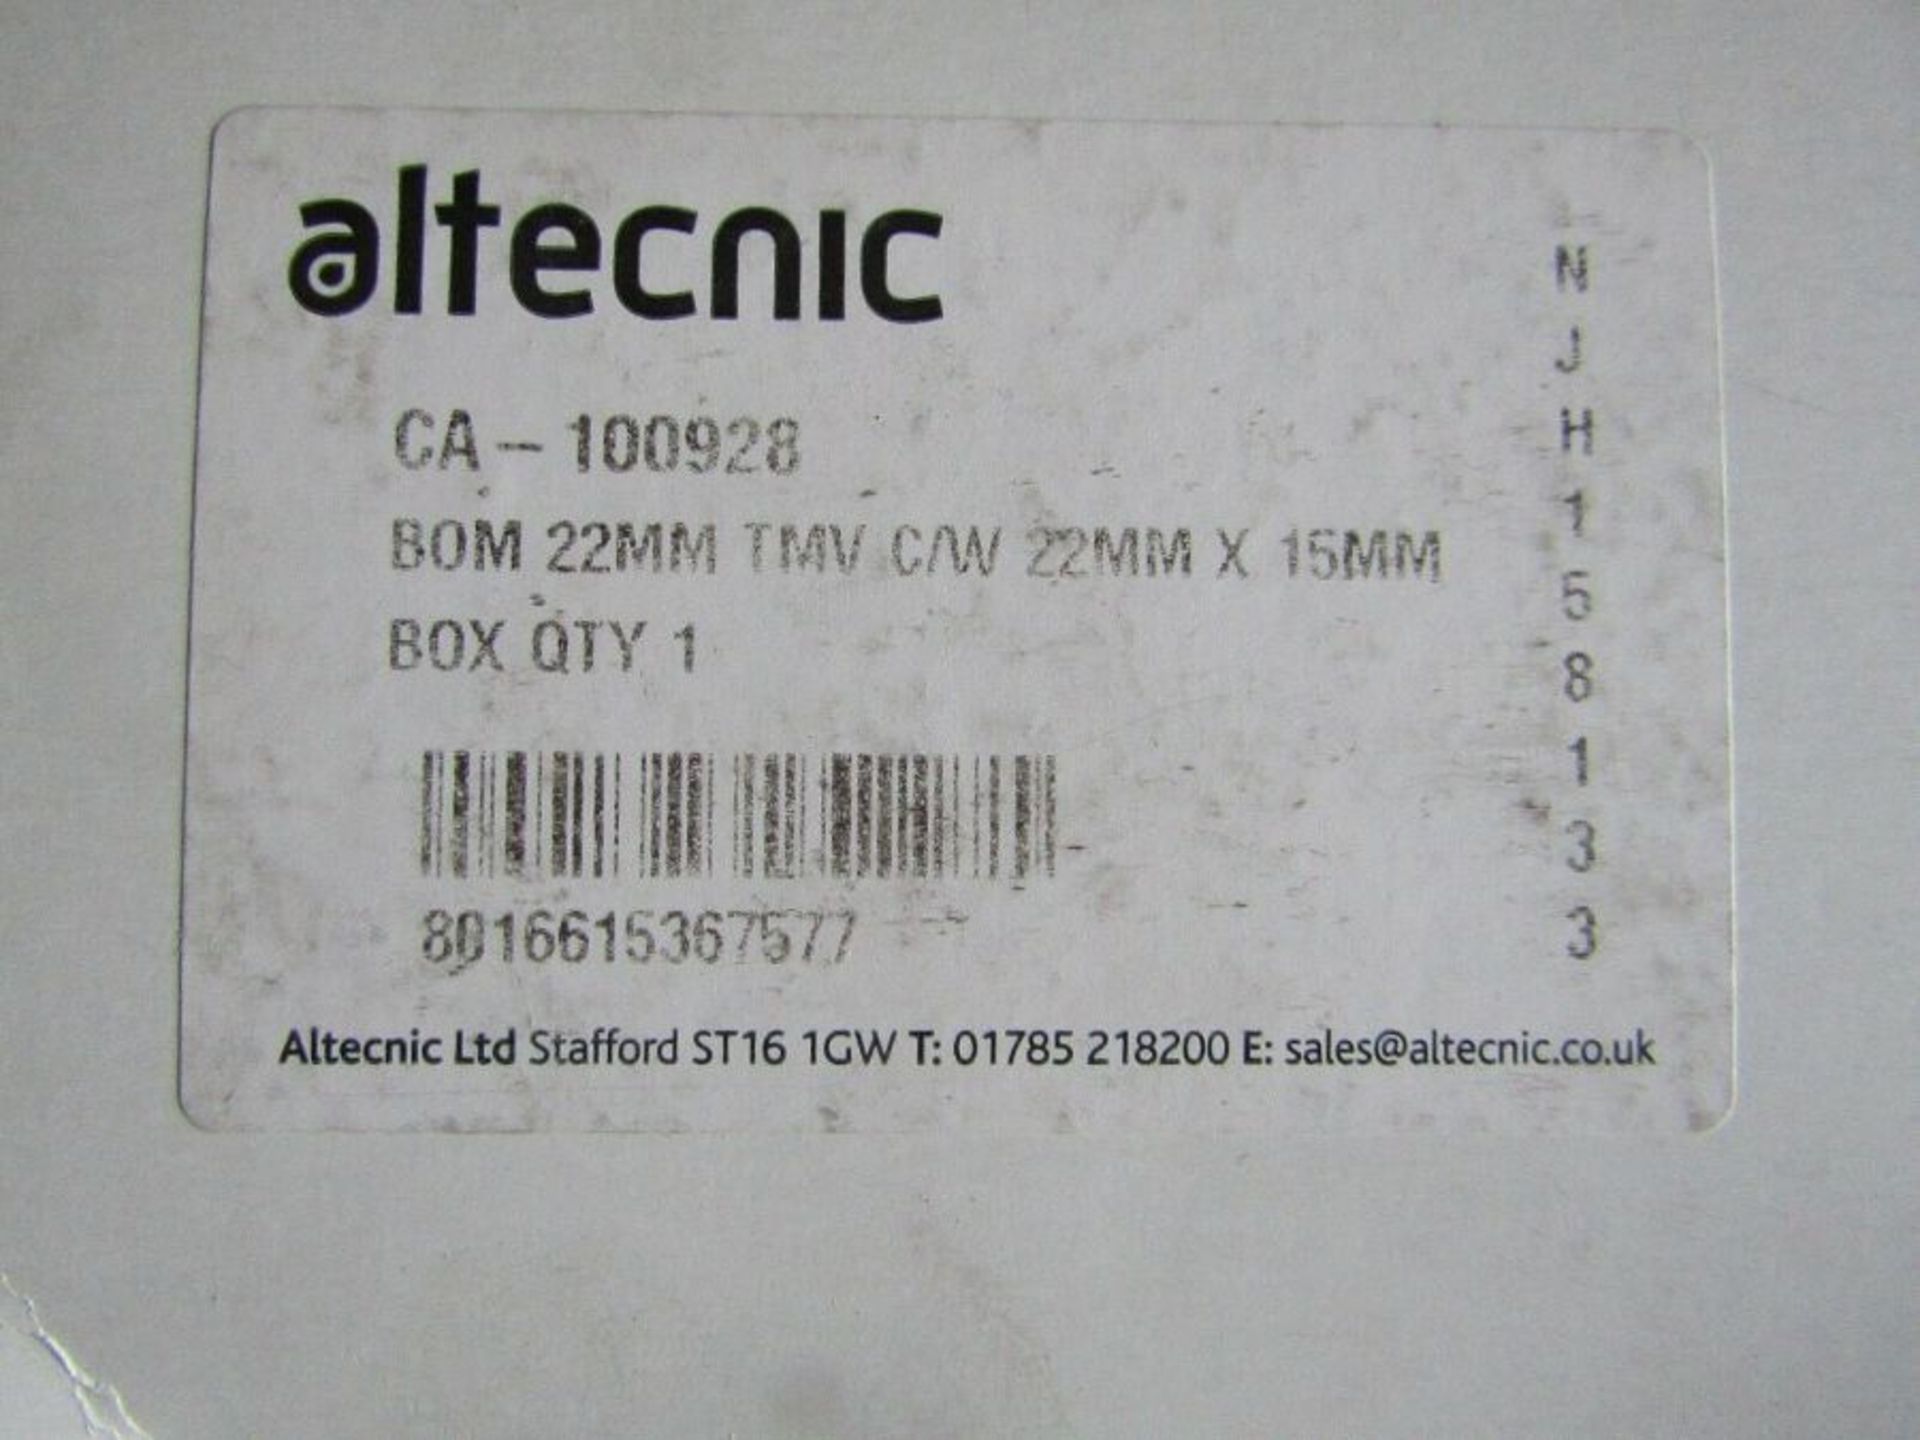 30 x Altecnic Brass Thermostatic Washroom Mixing Valve 22mm Compression H9554 7770368 - Image 2 of 2